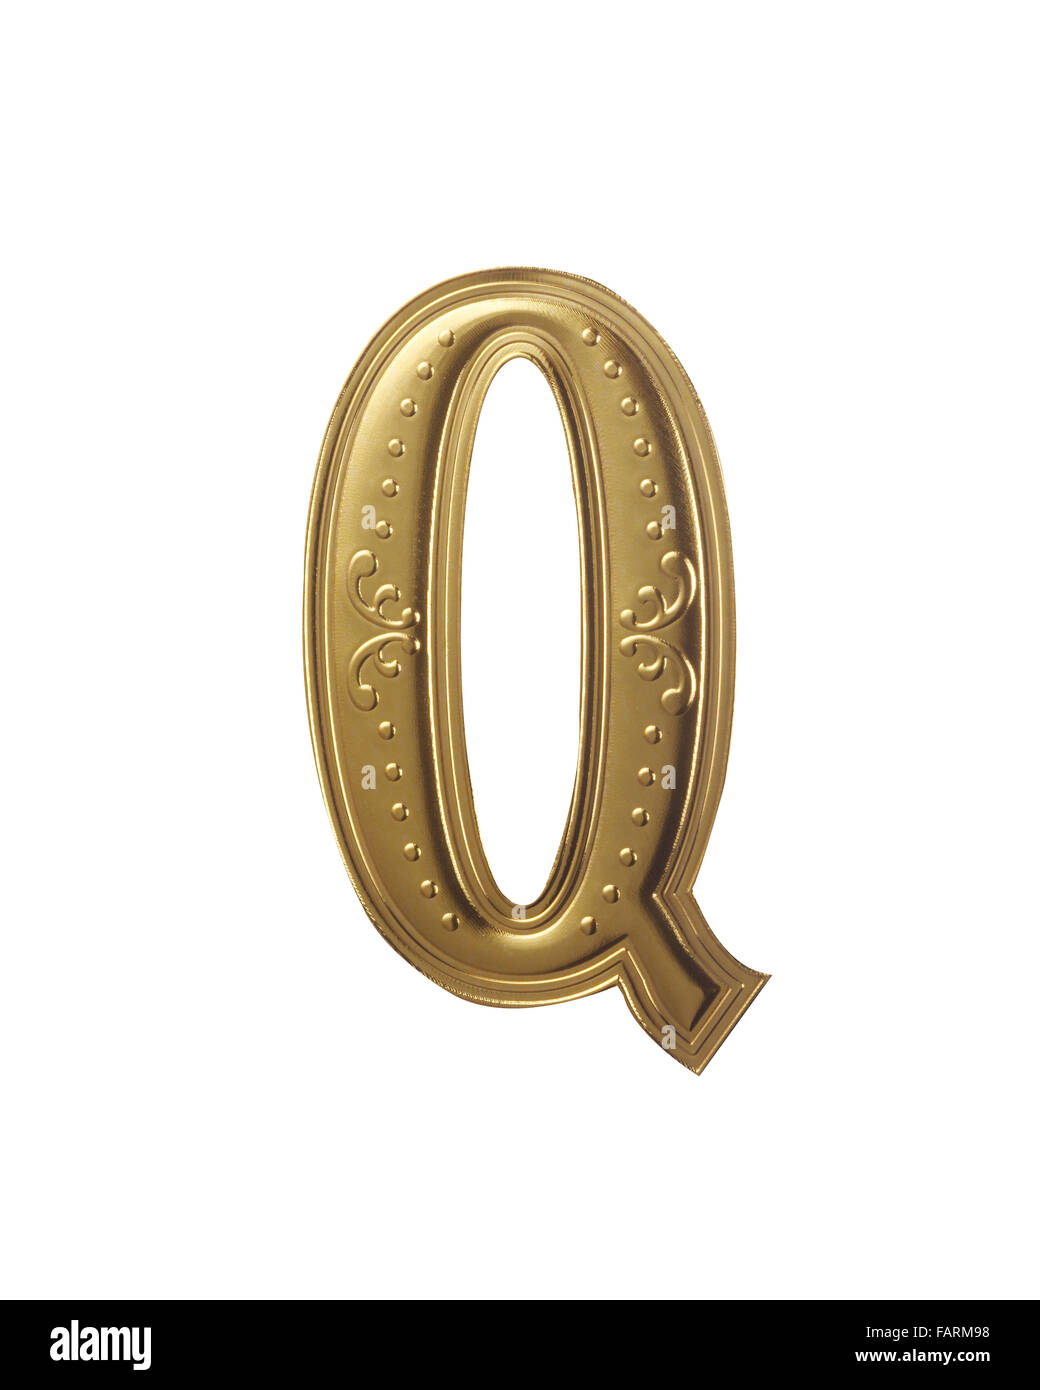 stock image of gold color alphabet with clipping path Stock Photo